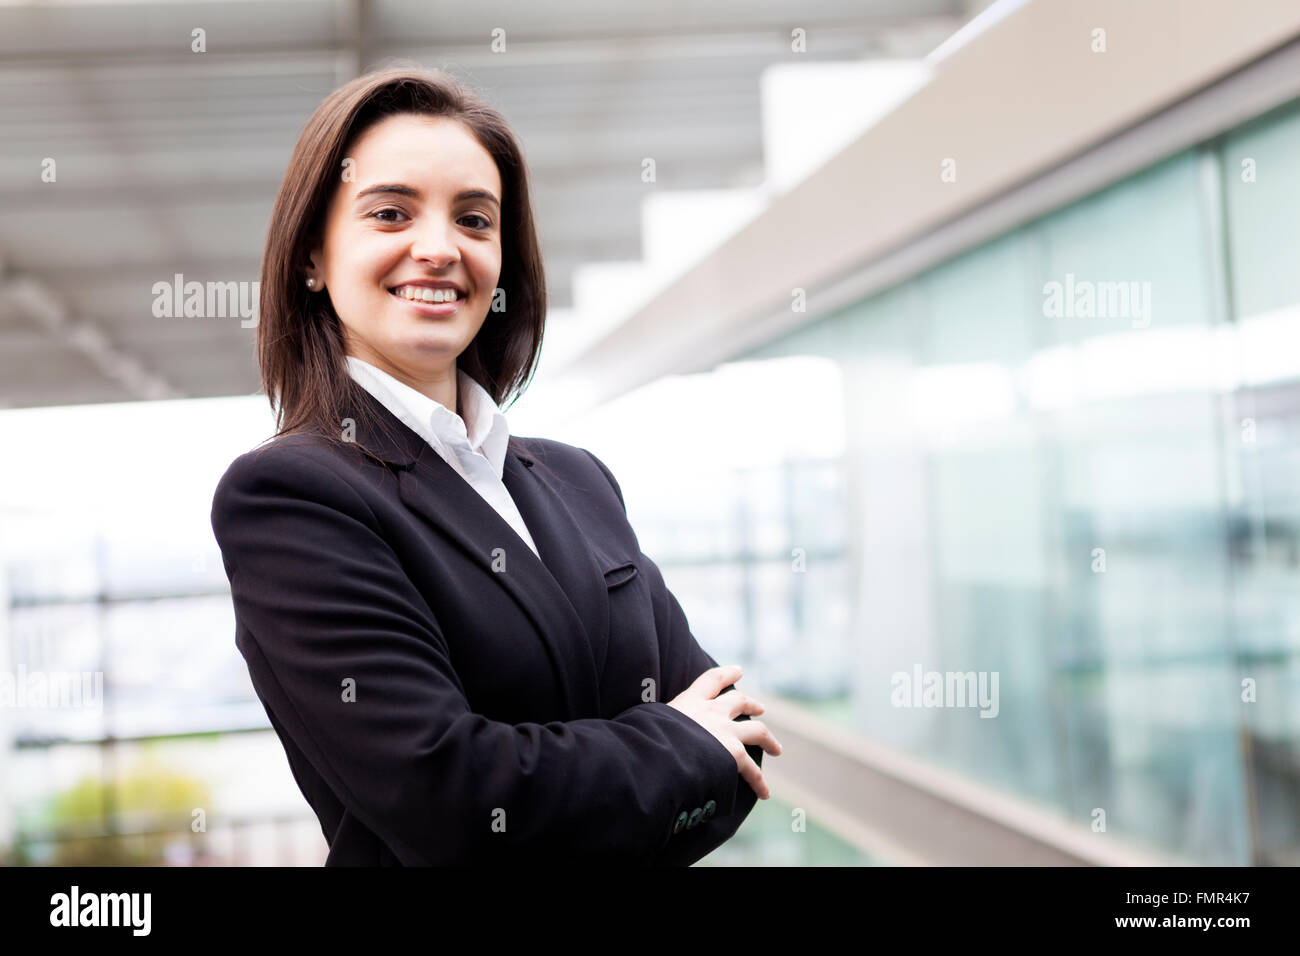 Portrait of a well-dressed young business woman with cross-armed Stock Photo